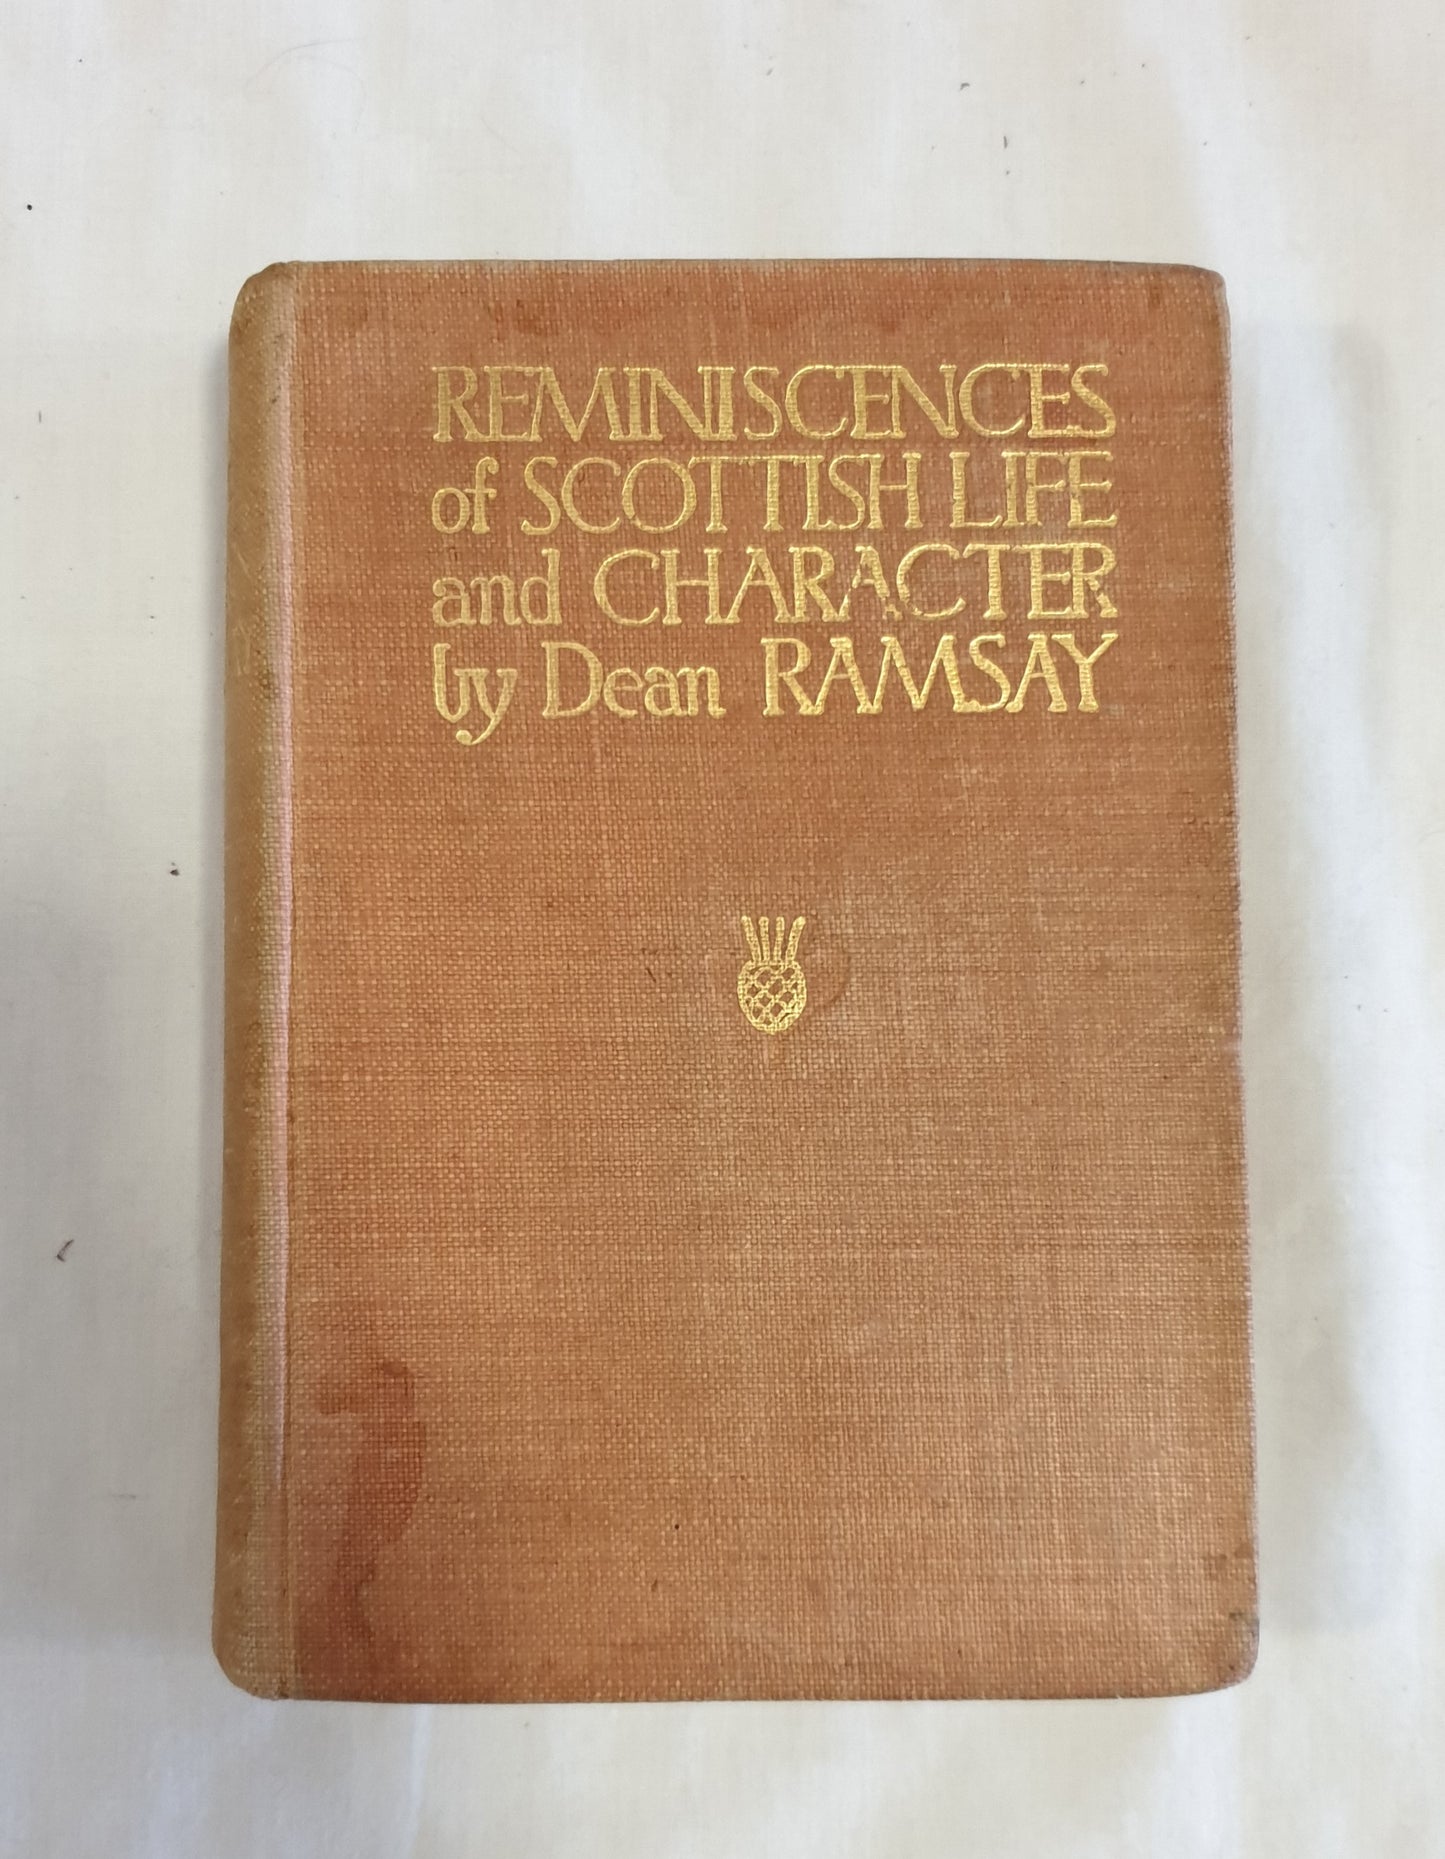 Reminiscences of Scottish Life & Character by Dean Ramsay